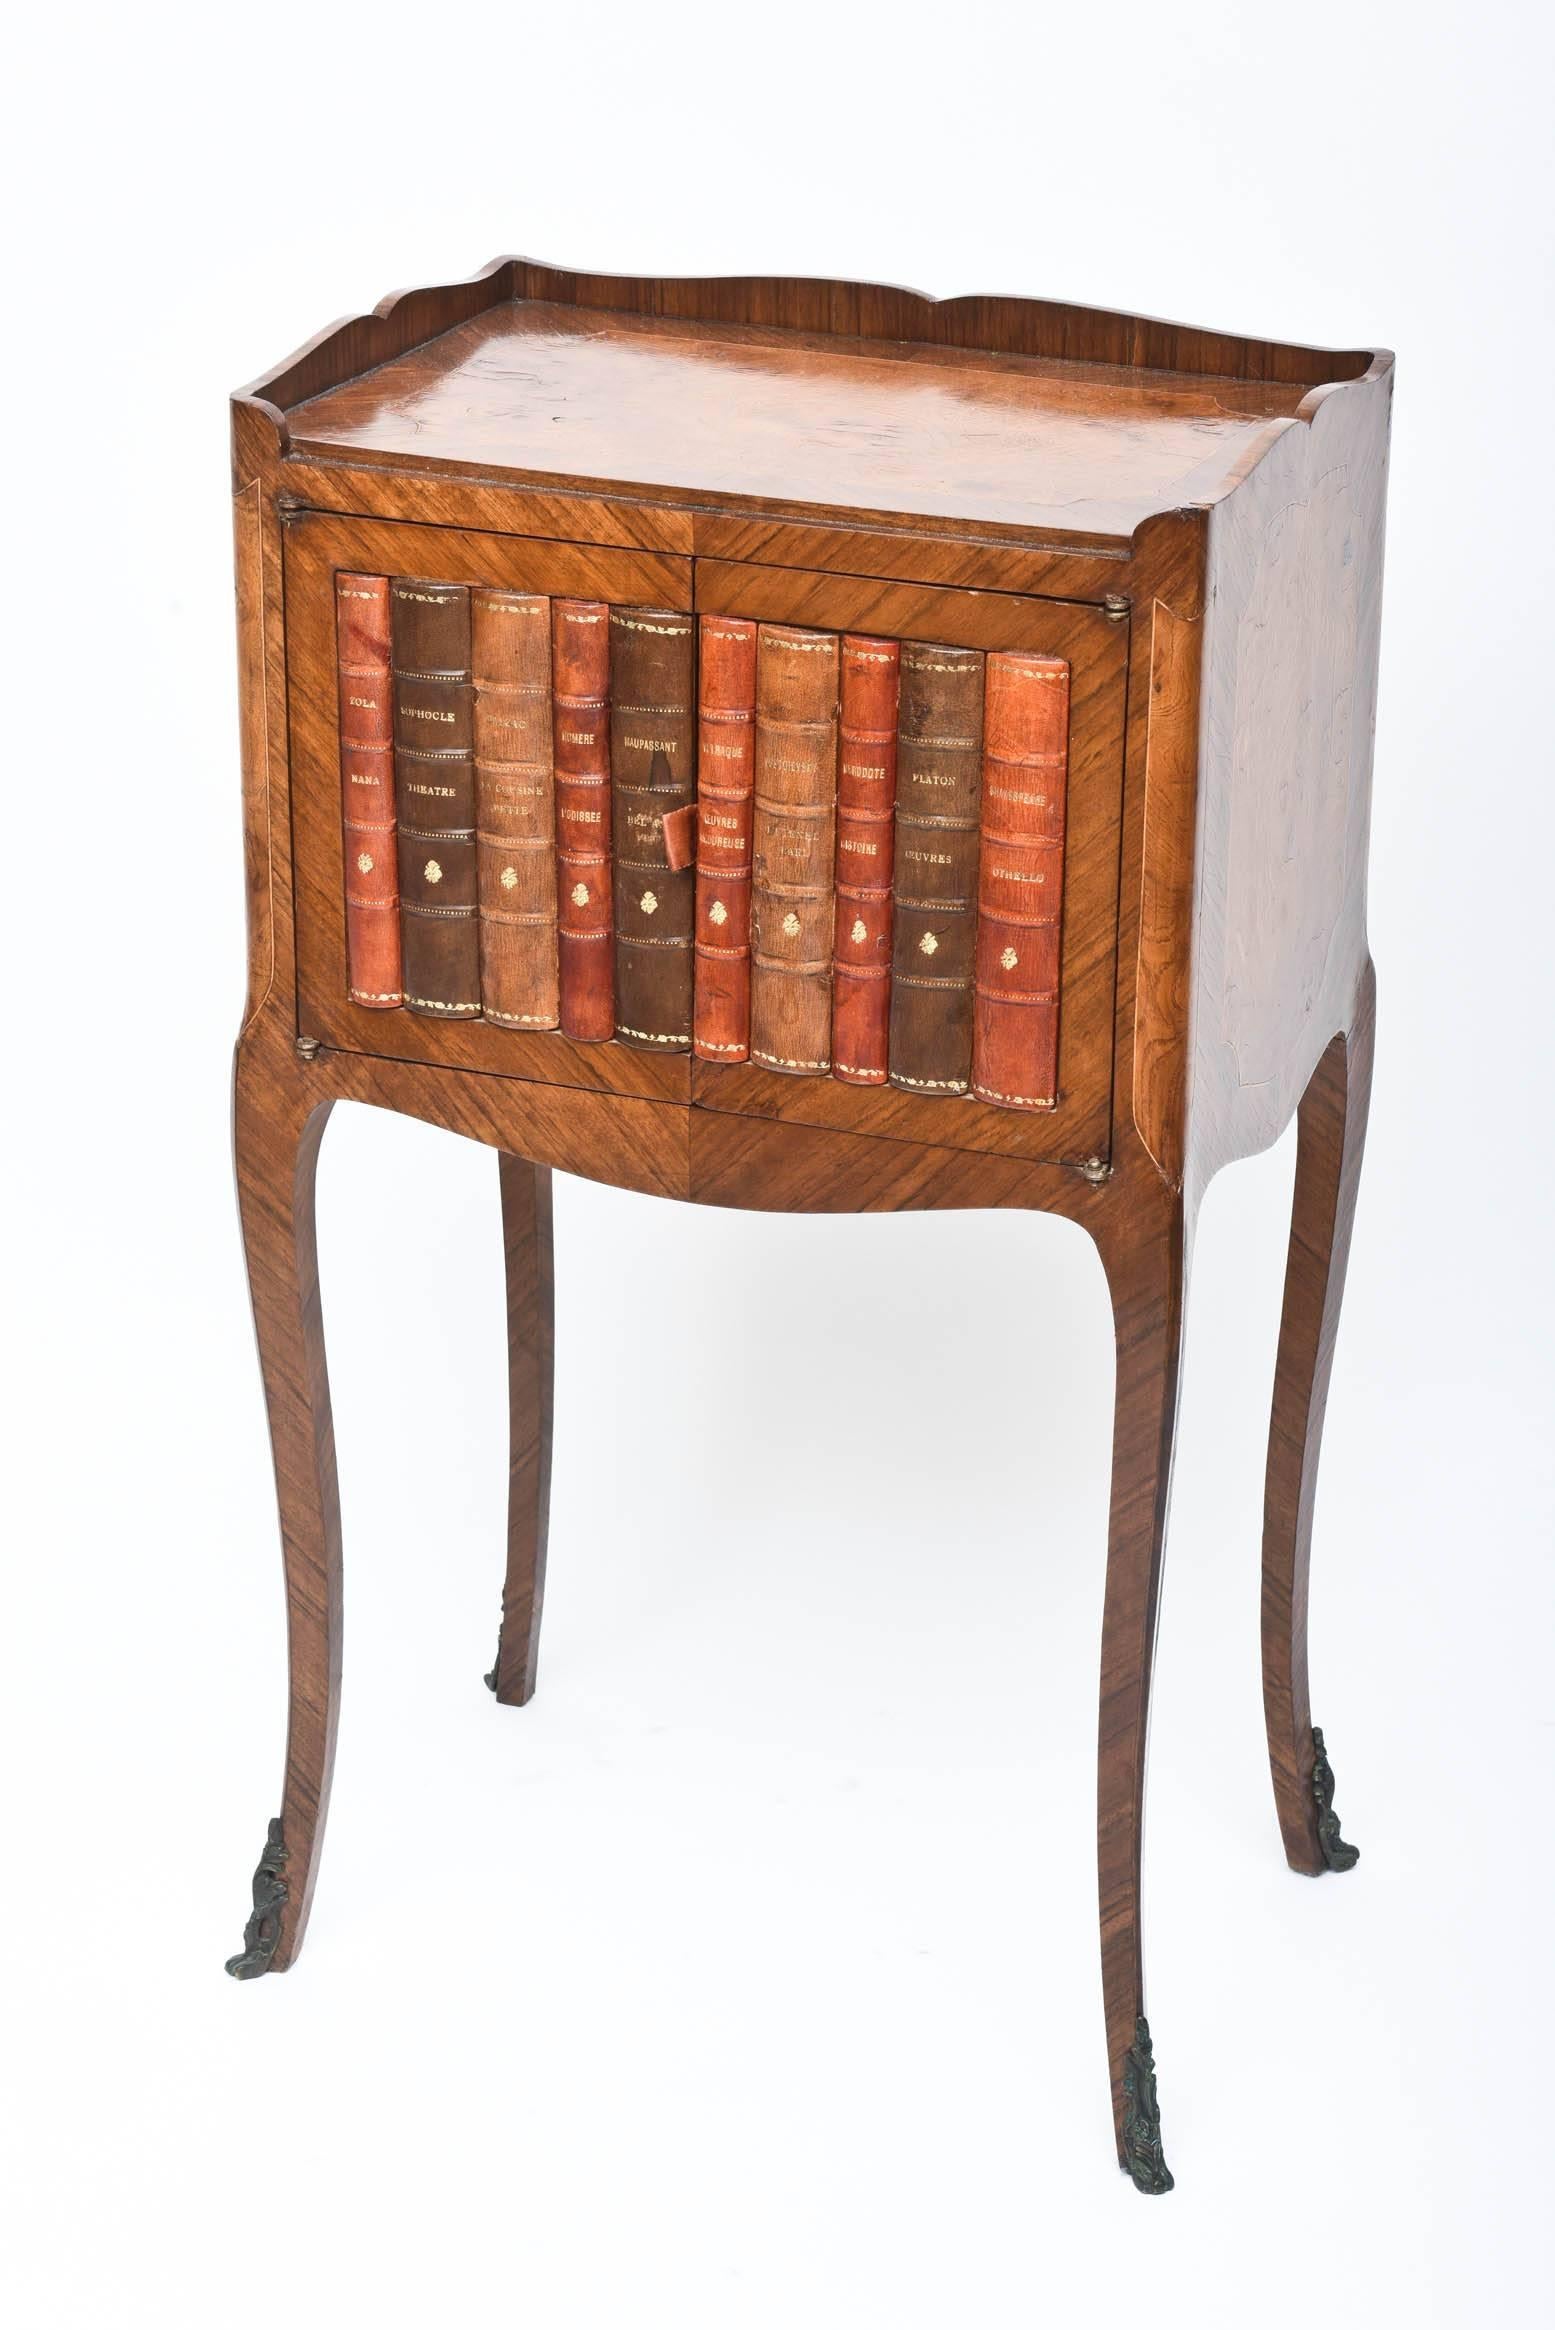 A petite table for your home office, hallway, living room featuring tooled leather book front that opens to reveal a storage area. Great stylized turned legs and wood inlaids. Very nice vintage condition.